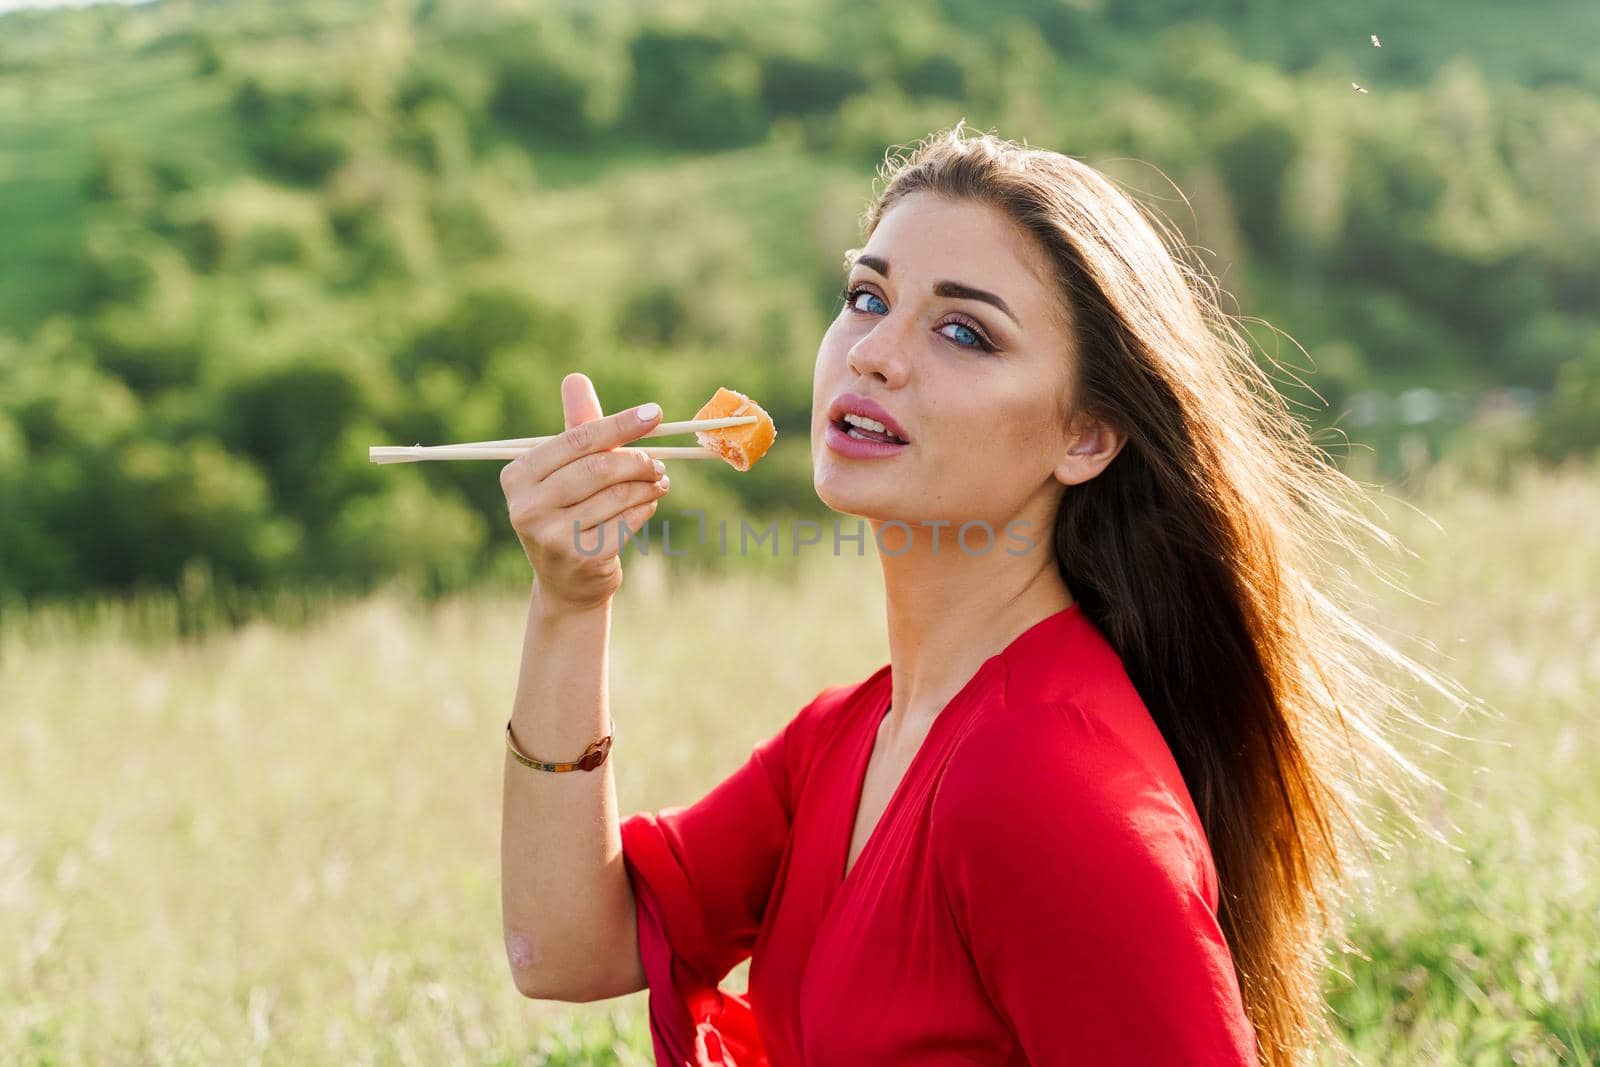 Sushi set and girl who reach out to bite sushi on green hills background. Food delivery service from japanese restaurant. Woman with blue eyes in red dress seats and eats sushi delivered by courier